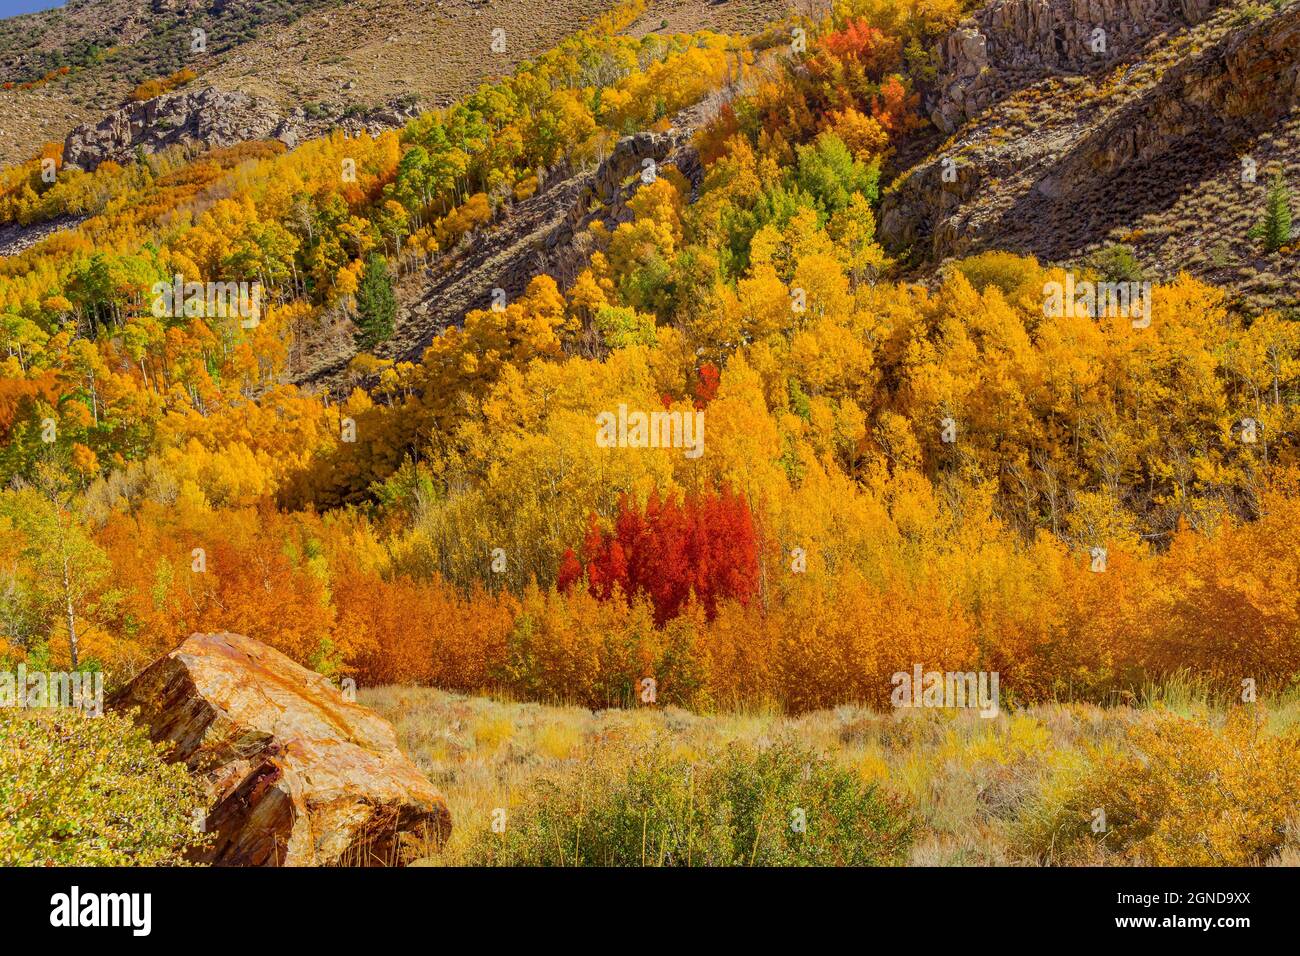 Aspens in fall colors of oranges, reds, and yellows fill the cliffs of the canyon in the Bishop area of Central California. Stock Photo